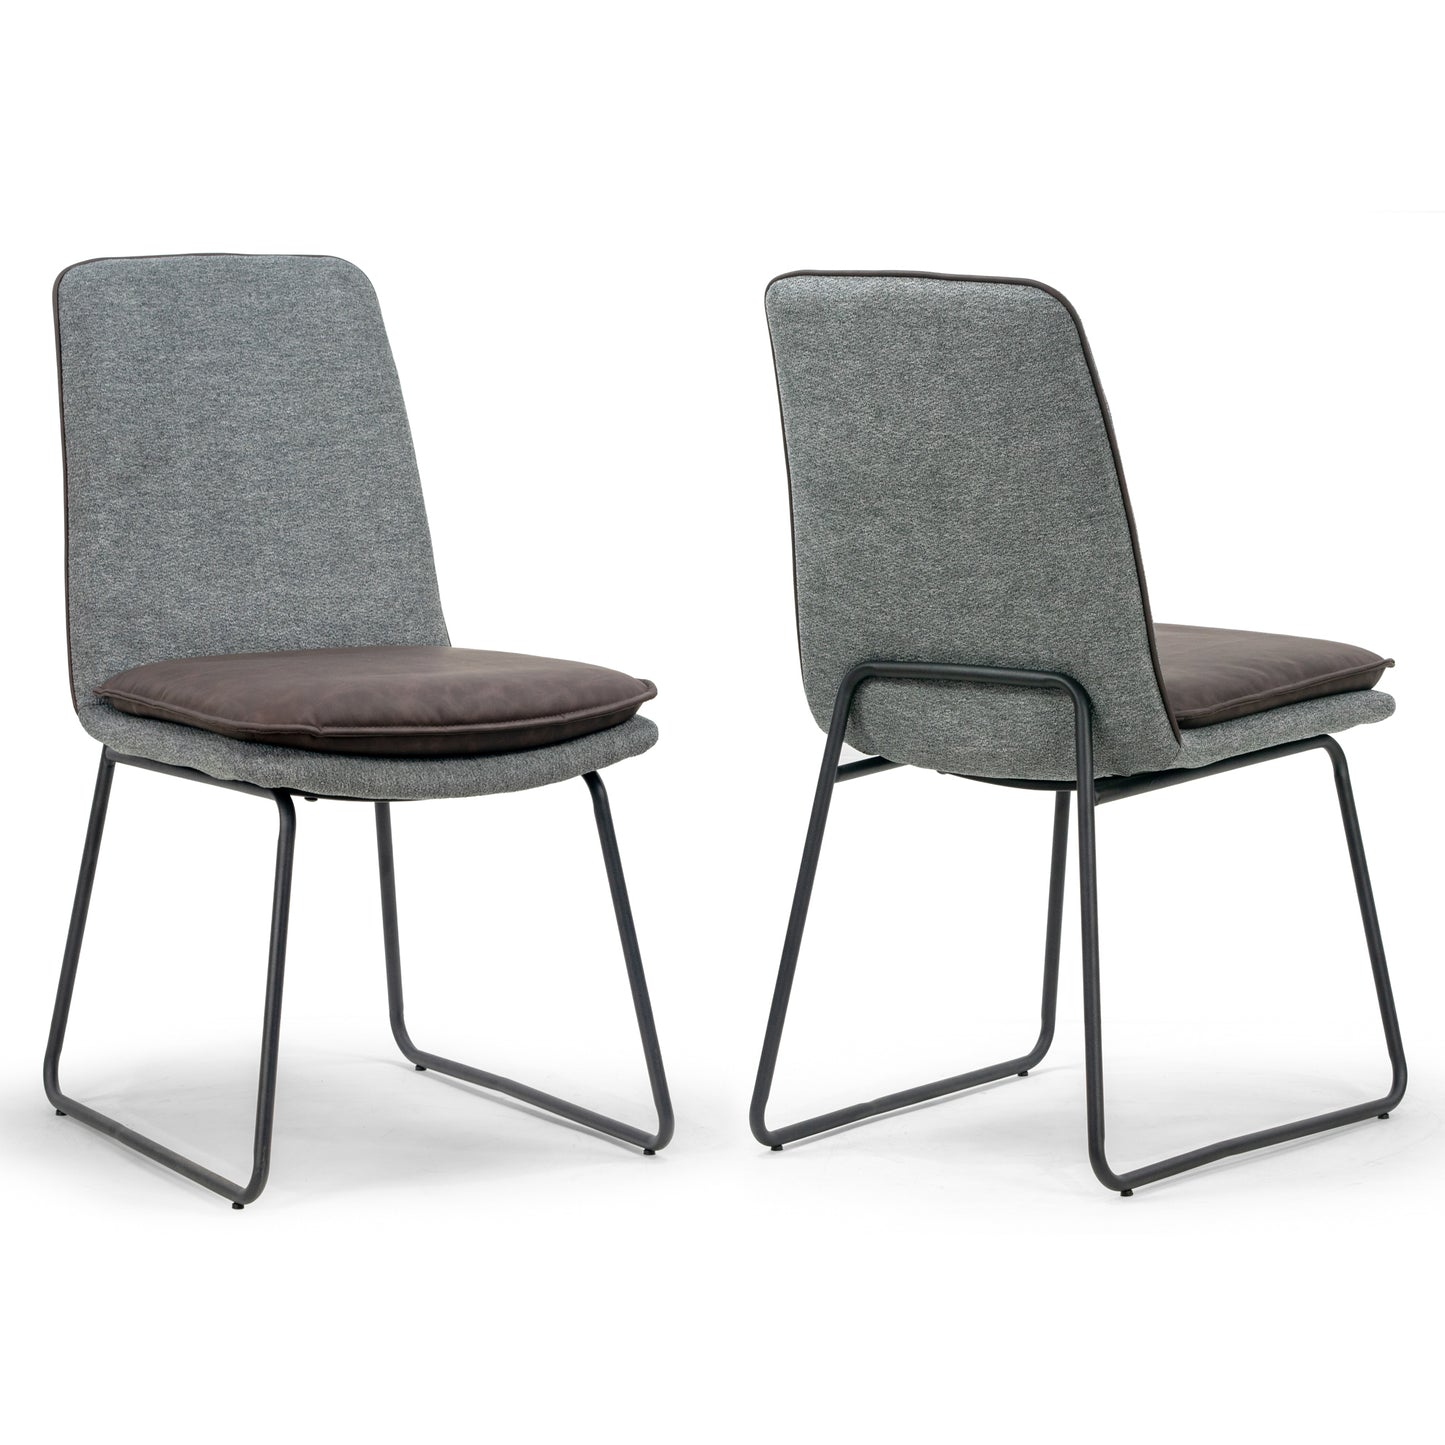 Set of 2 Arch Grey Fabric Dining Chair with Brown Cushion and Piping